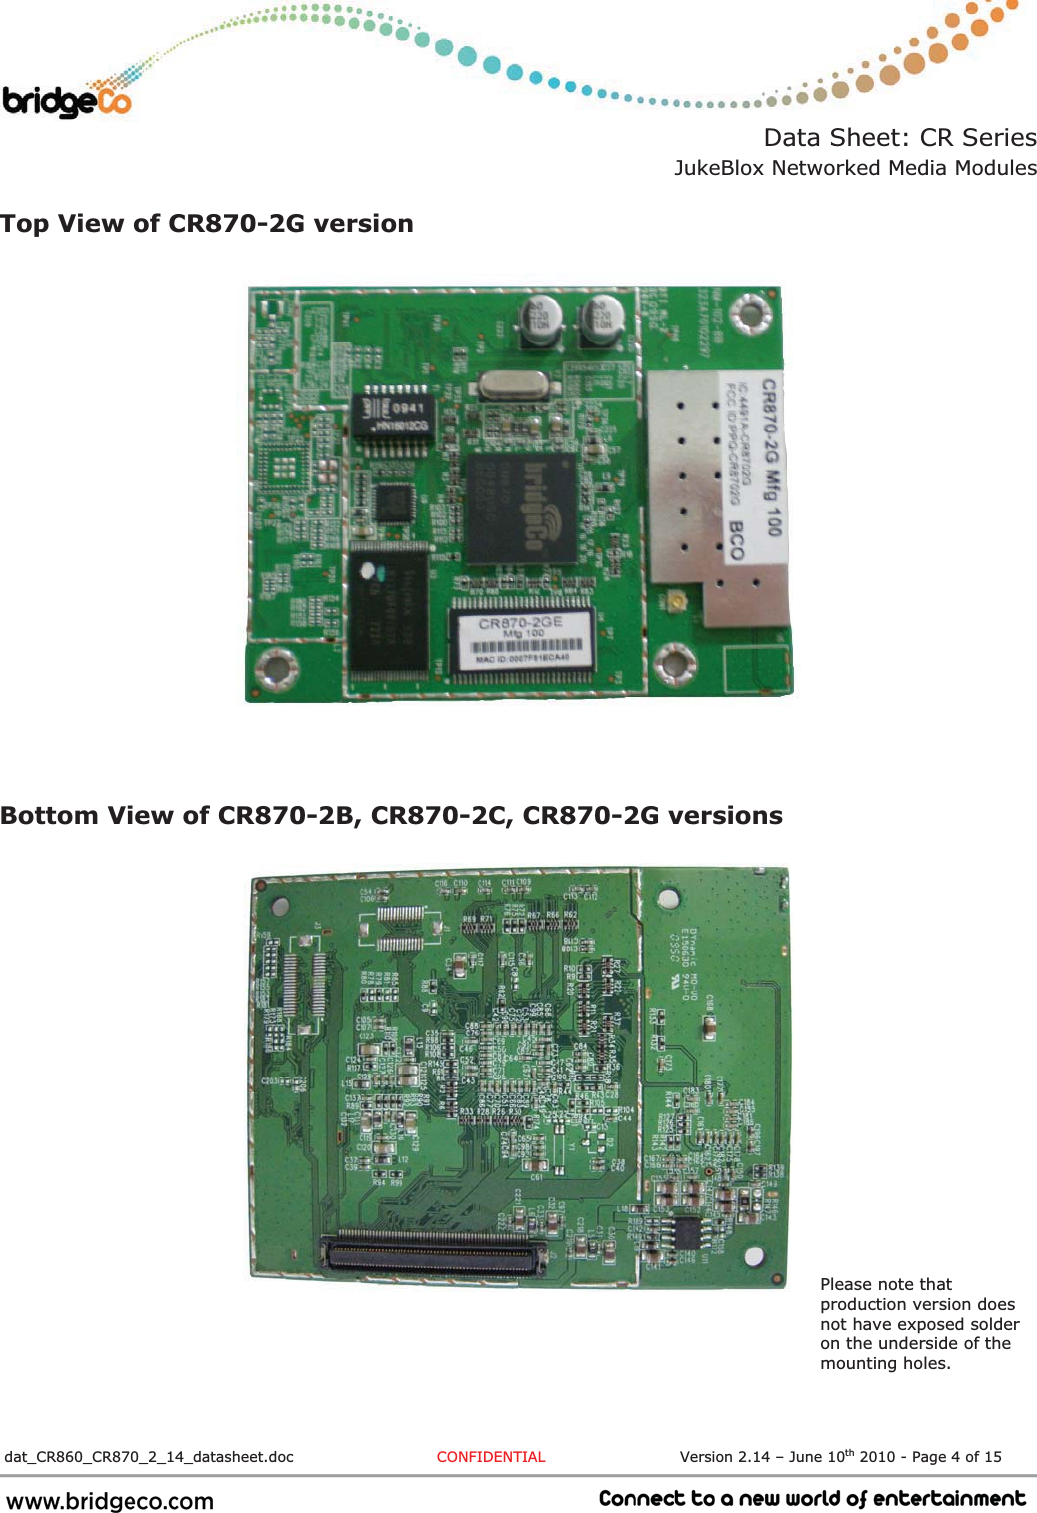 Data Sheet: CR Series JukeBlox Networked Media Modules  dat_CR860_CR870_2_14_datasheet.doc  CONFIDENTIAL                           Version 2.14 – June 10th 2010 - Page 4 of 15                             Top View of CR870-2G version Bottom View of CR870-2B, CR870-2C, CR870-2G versions Please note that production version does not have exposed solder on the underside of the mounting holes.